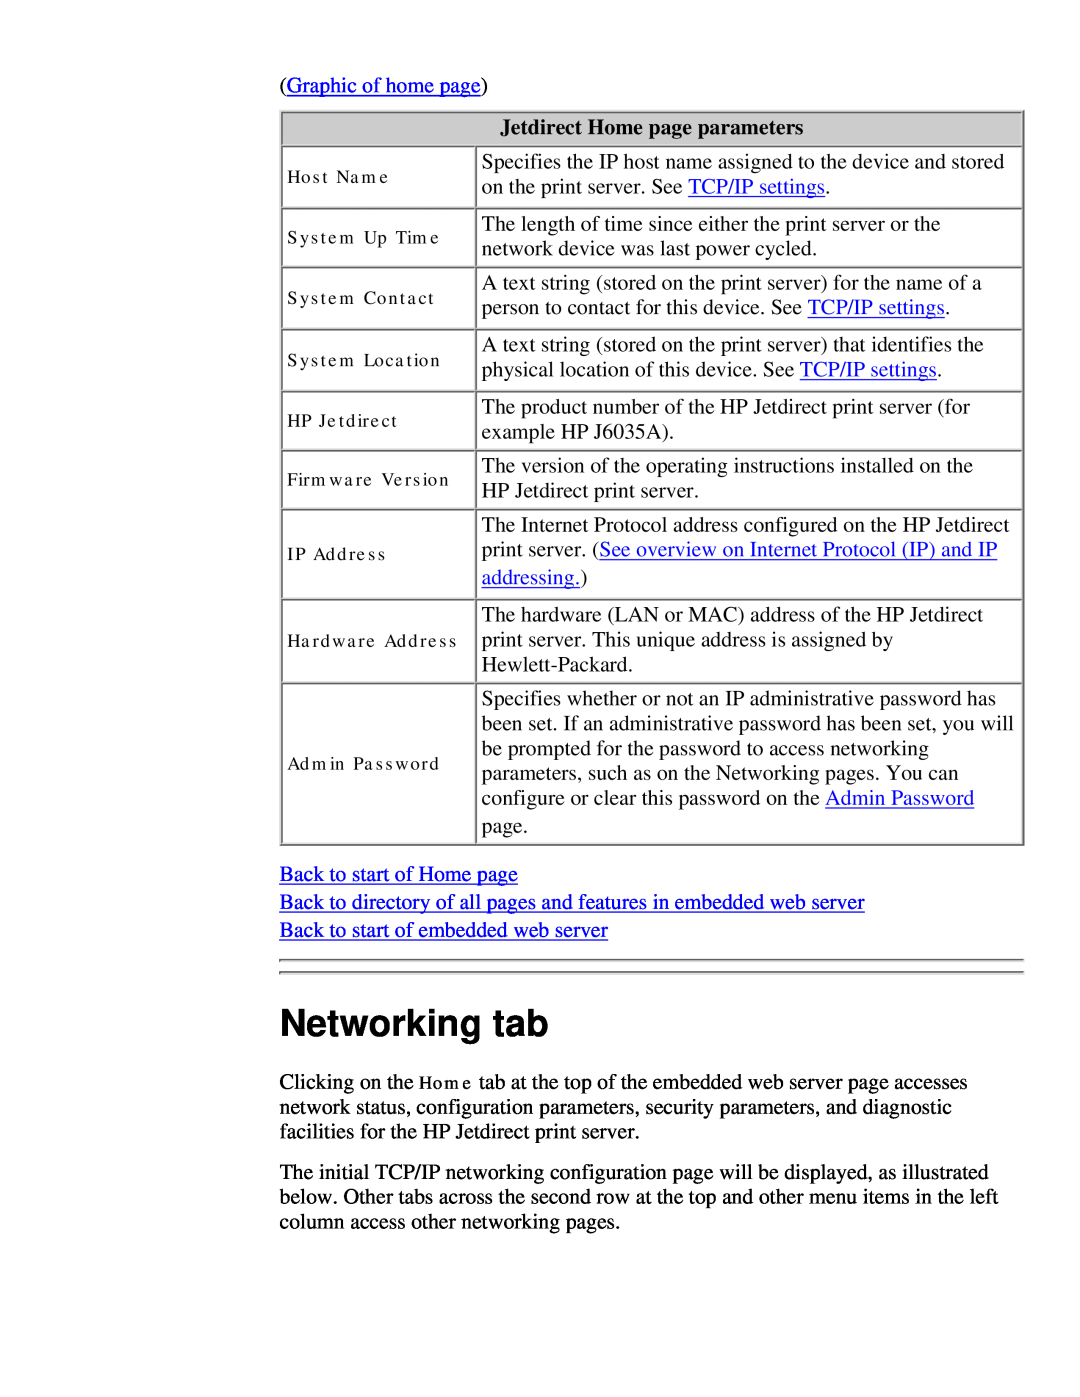 HP 175X, 310X Networking tab, Graphic of home page, Jetdirect Home page parameters, addressing, Back to start of Home page 